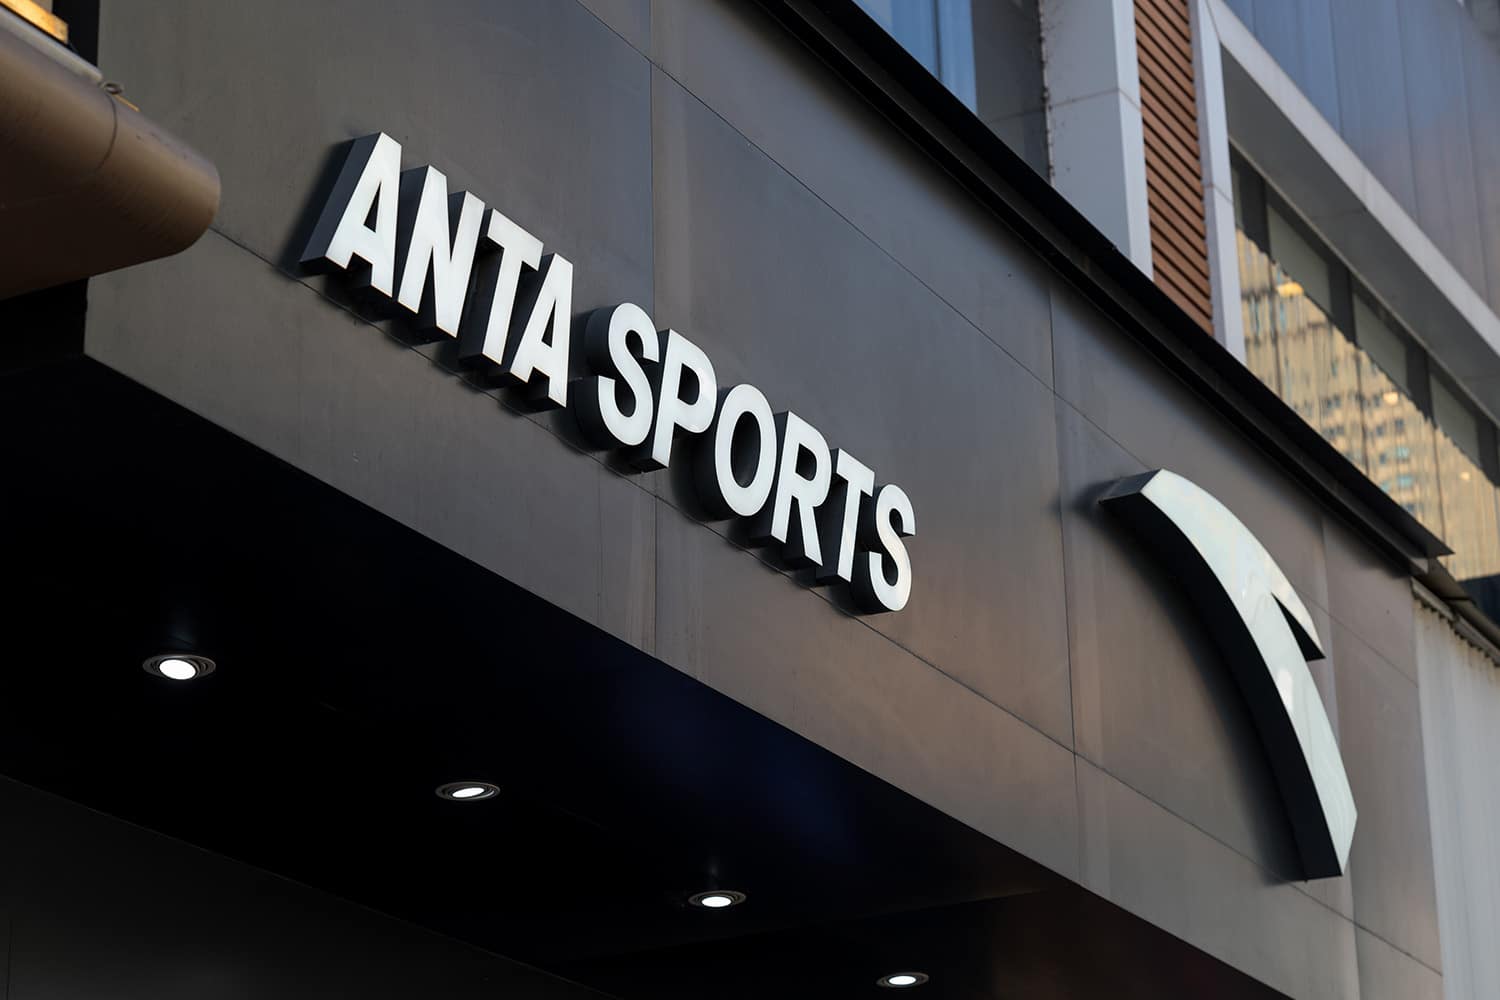 Anta Sports logo on side of building